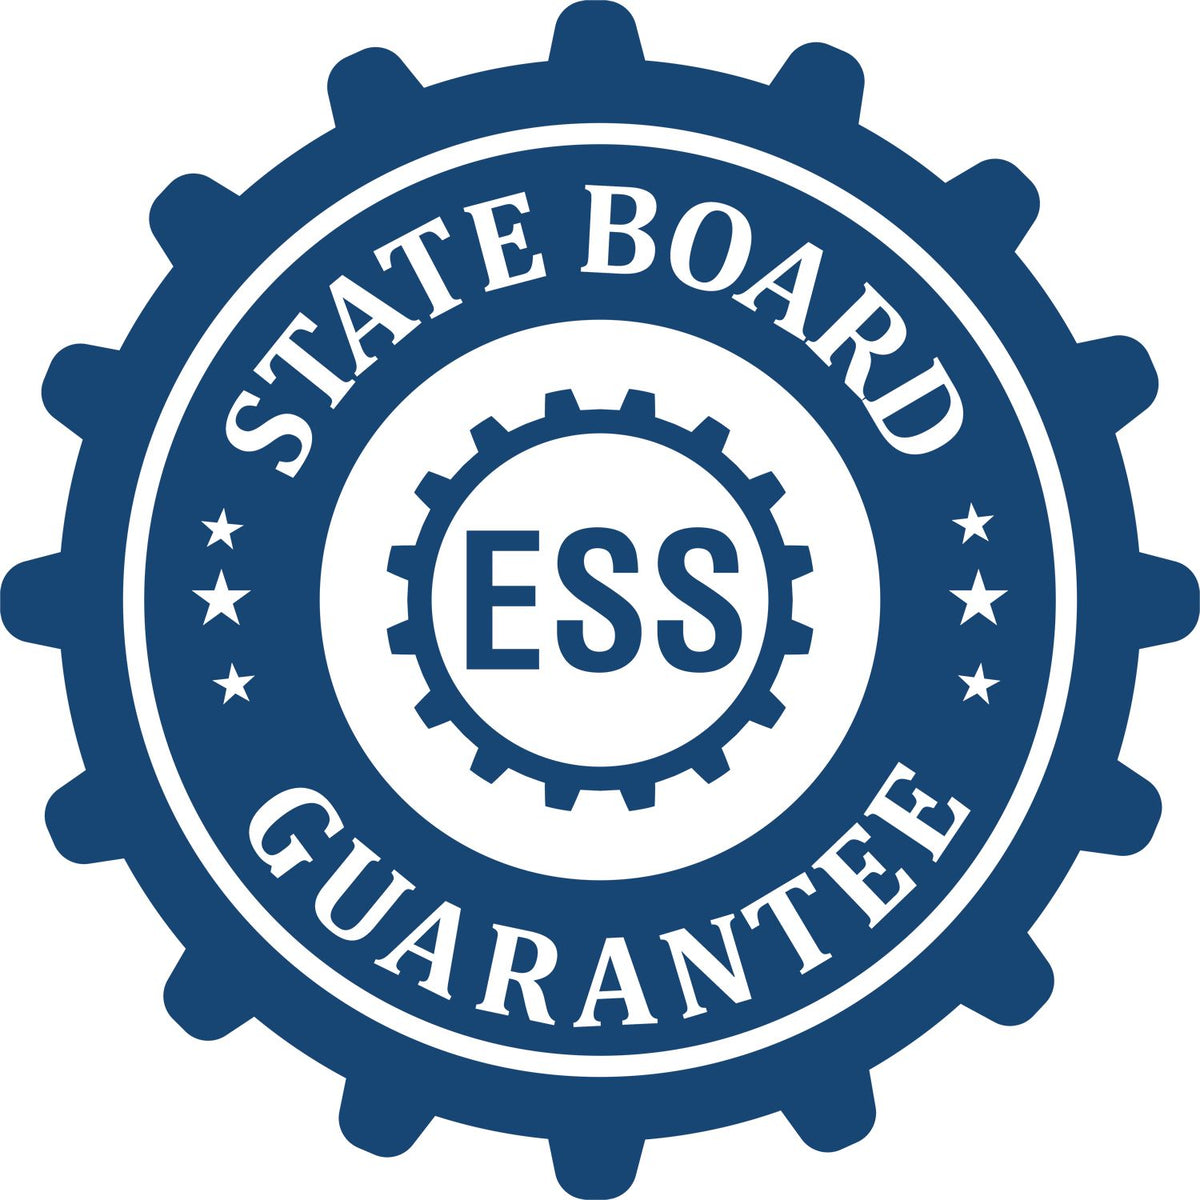 An emblem in a gear shape illustrating a state board guarantee for the Hybrid New Mexico Geologist Seal